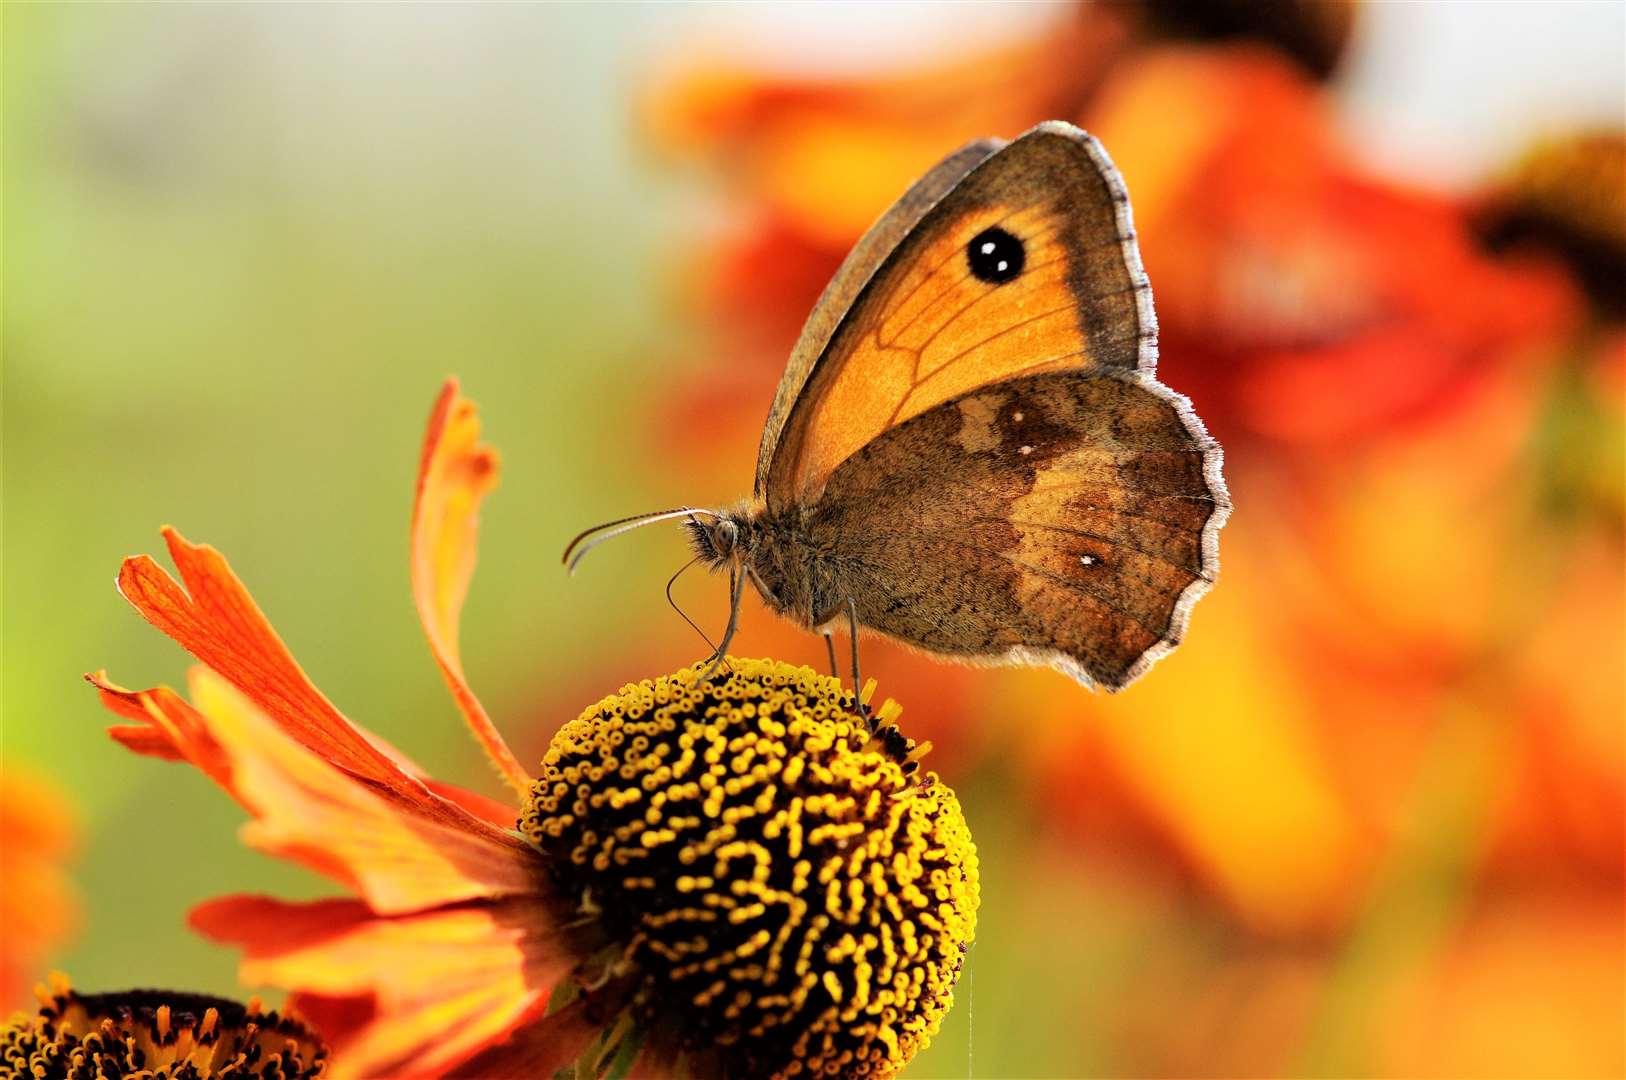 Gatekeeper was the most spotted butterfly during this year’s BBC. Picture: Liam Richardson